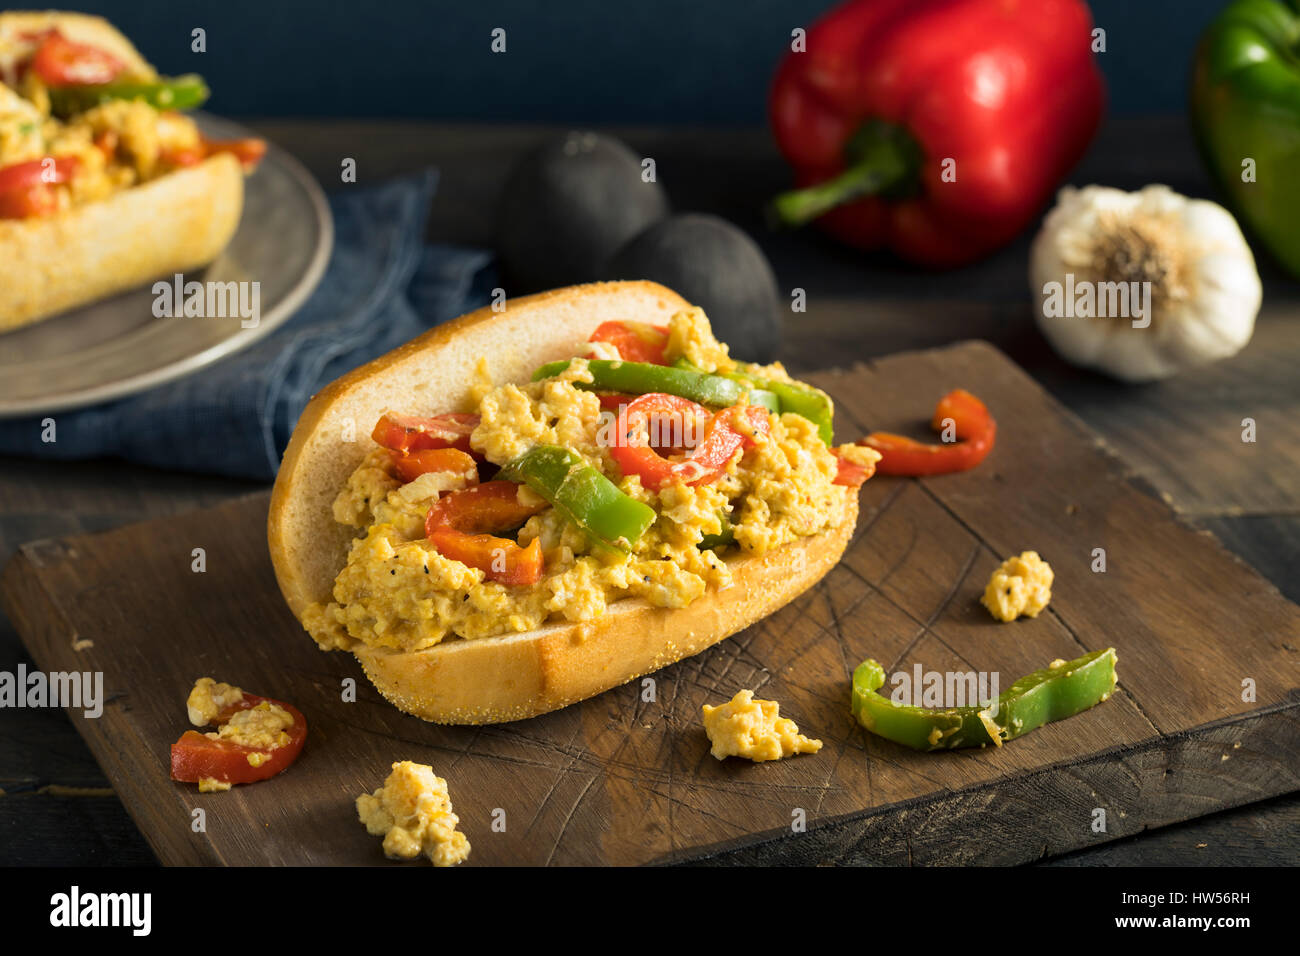 Homemade Pepper and Egg Sandwich on a Roll for Lent Stock Photo